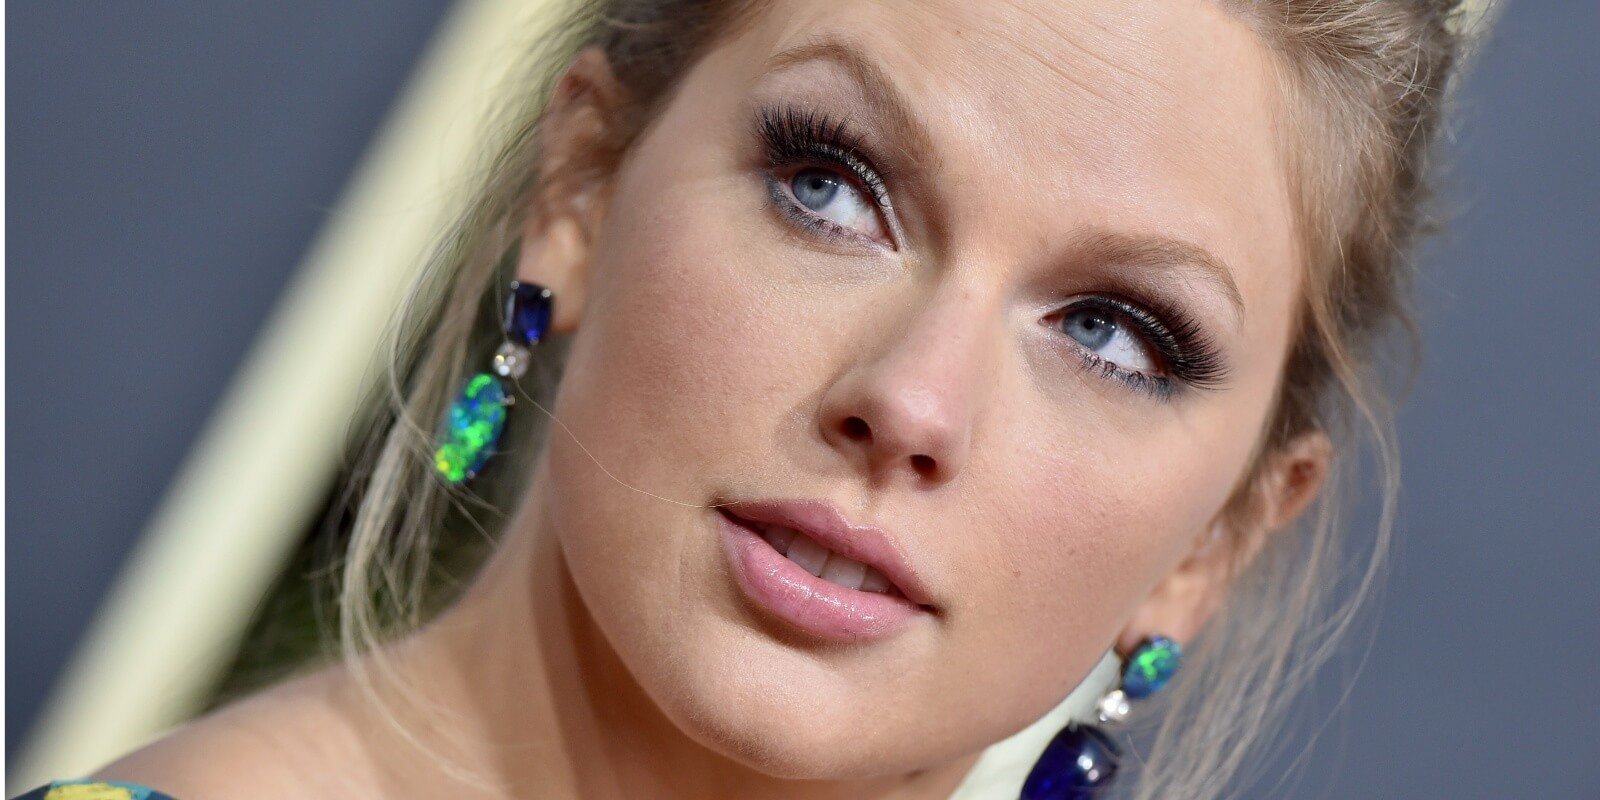 Taylor Swift looks away from the camera on the red carpet at the 2020 Golden Globe Awards.